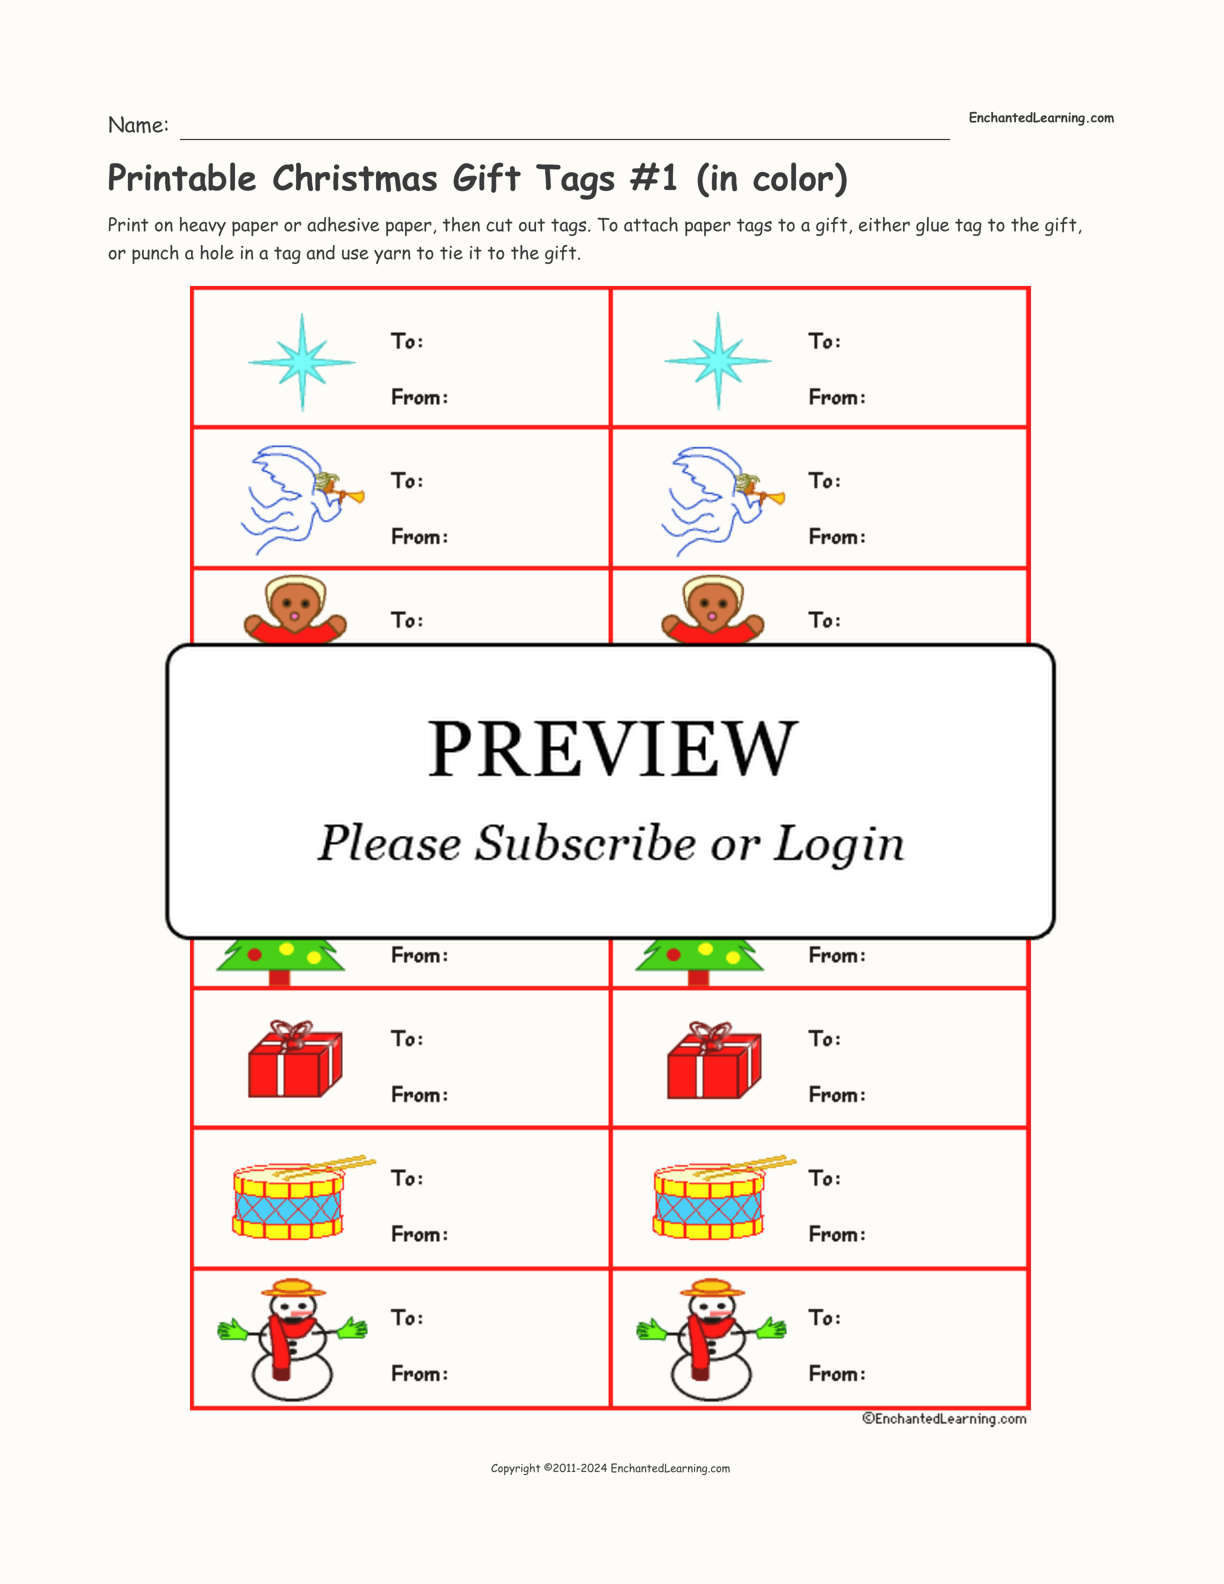 Printable Christmas Gift Tags #1 (in color) interactive printout page 1